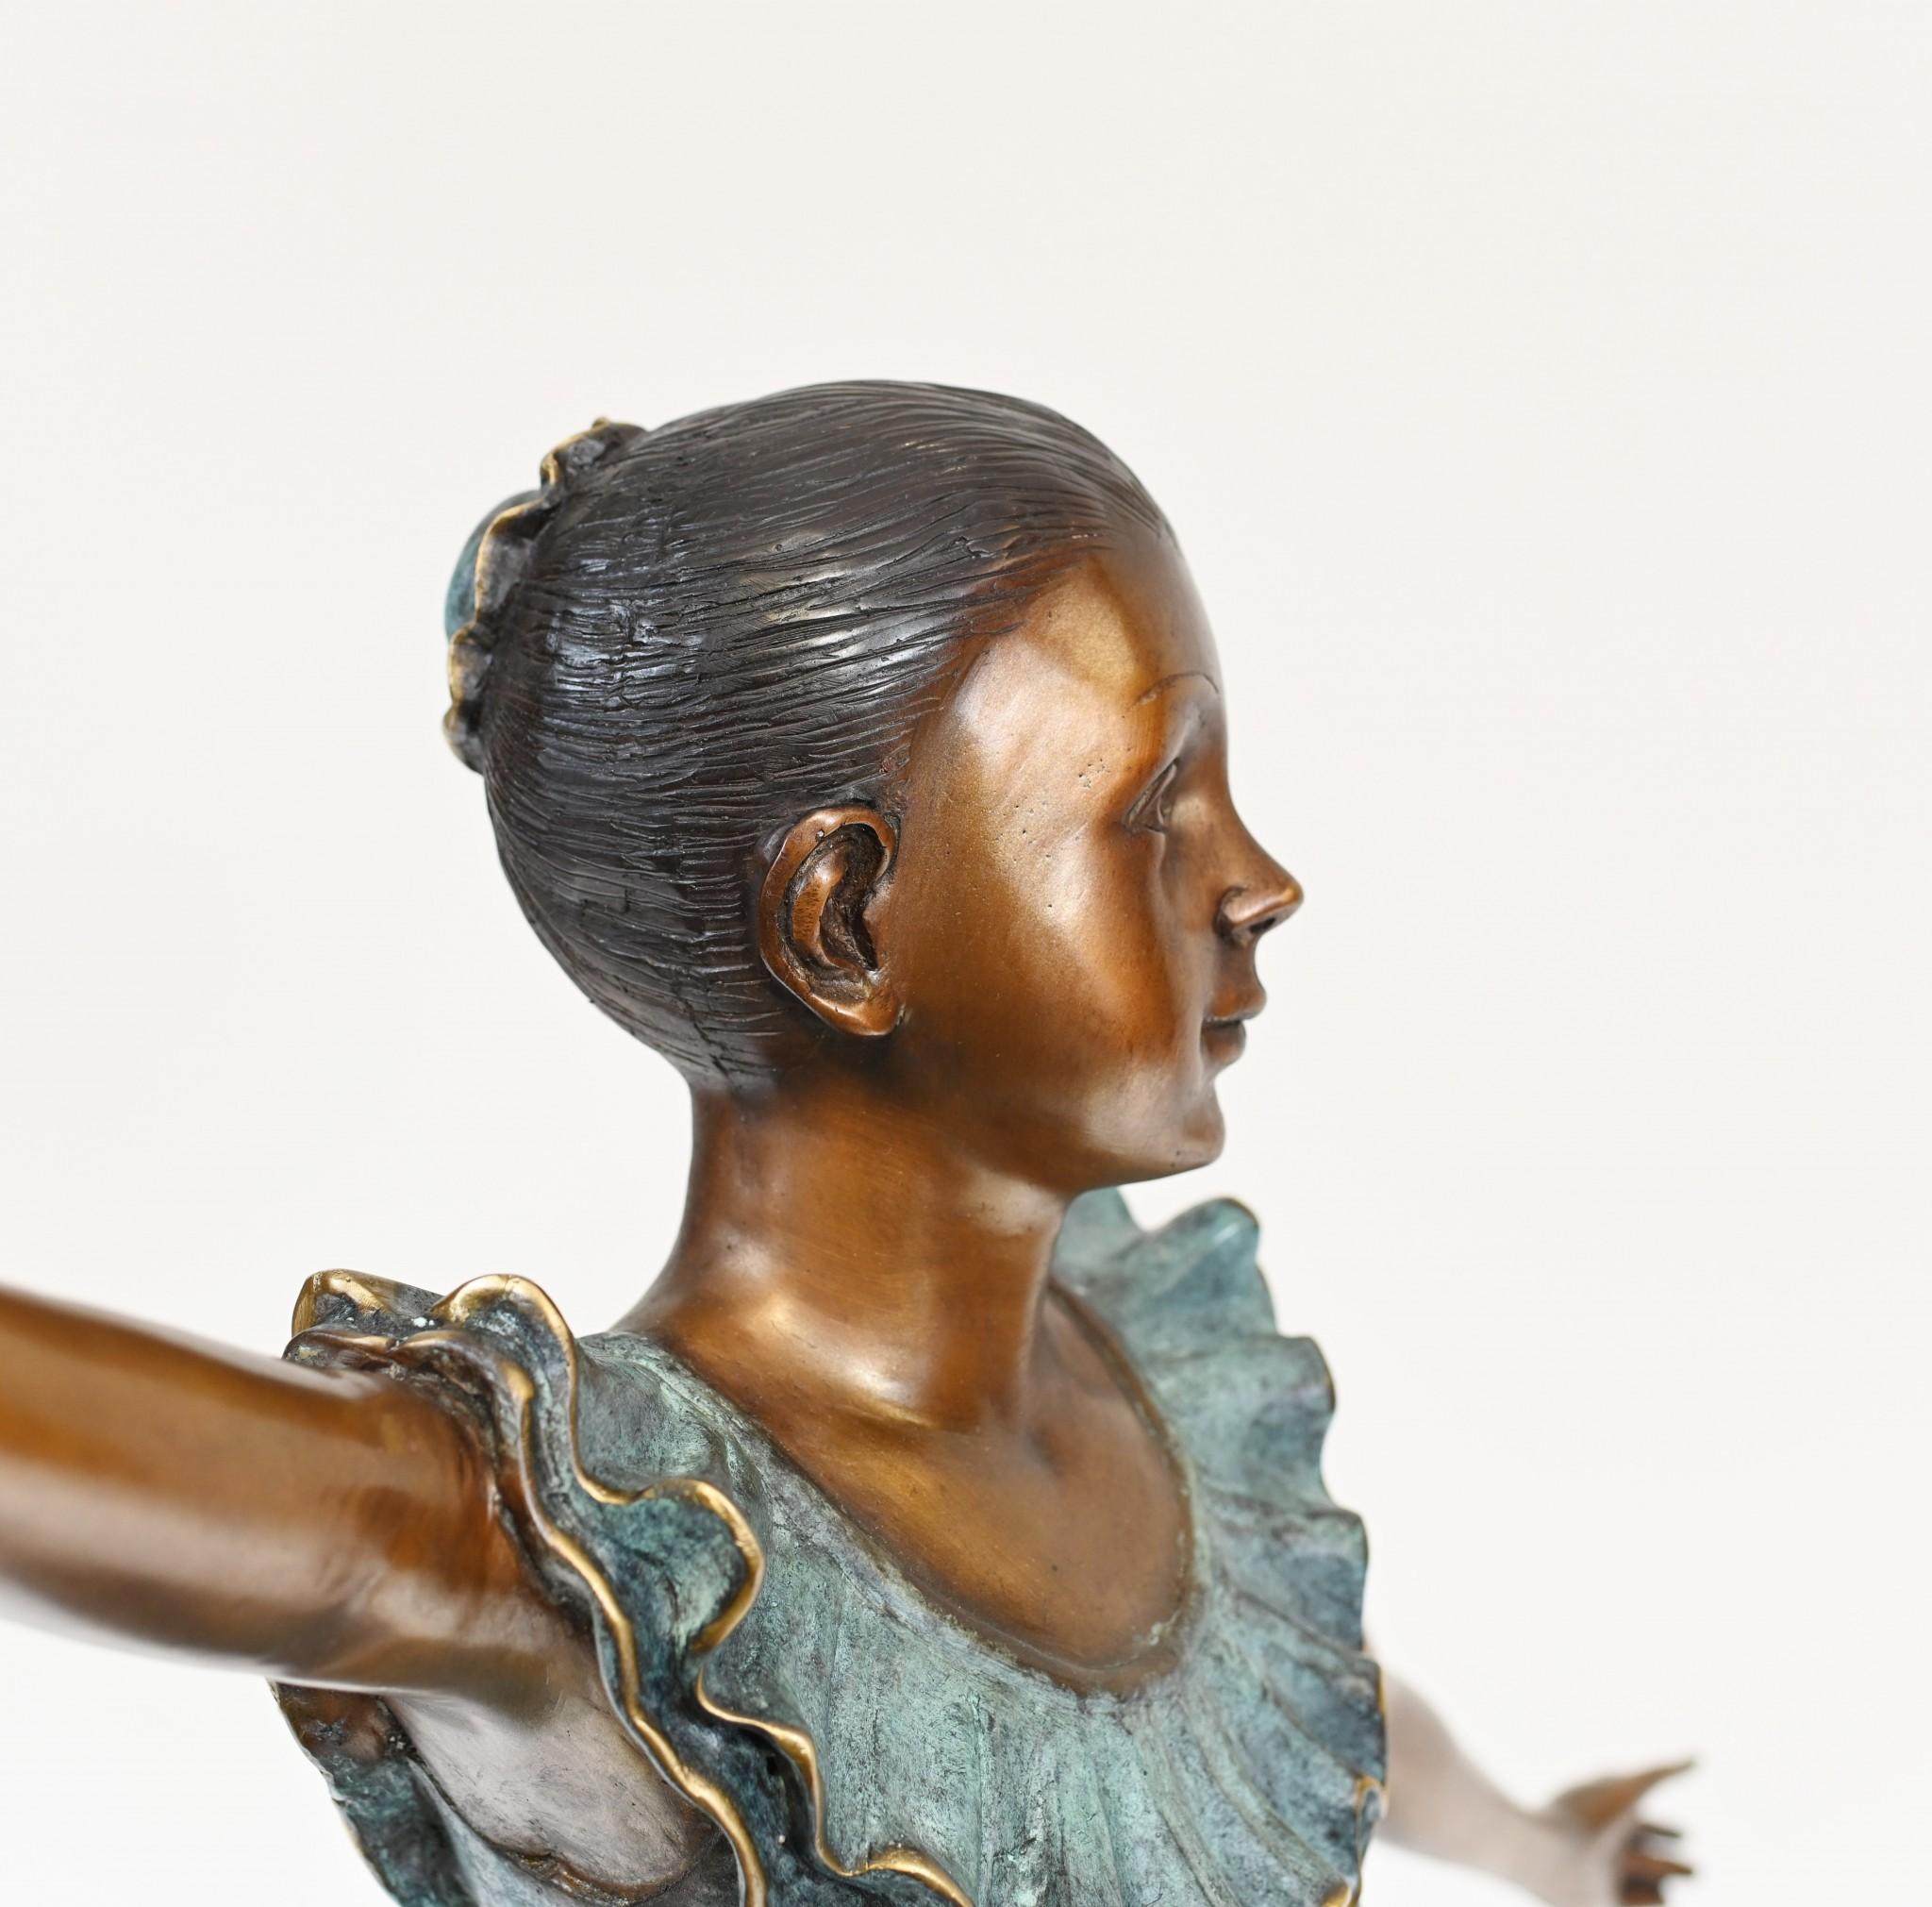 Elegant French bronze casting of a young ballerina
Lovely green patina to the Degas manner piece
Bought from a dealer on Marche Biron at Paris antiques markets
Some of our items are in storage so please check ahead of a viewing to see if it is on